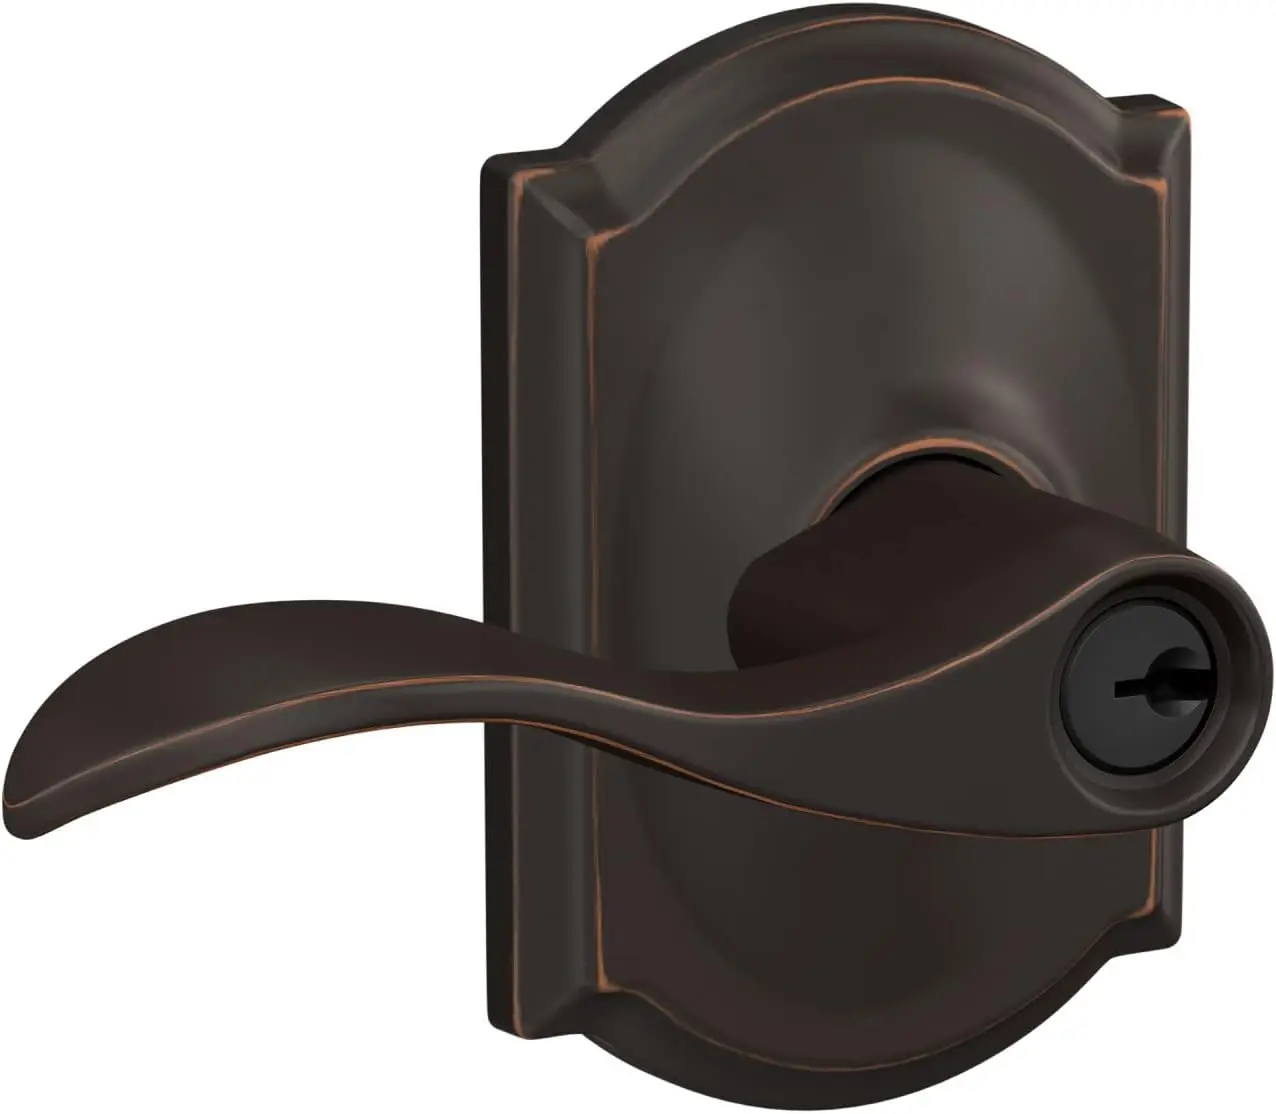 

F51A ACC 716 CAM Accent Door Lever with Camelot Trim, Keyed Entry Lock, Aged Bronze